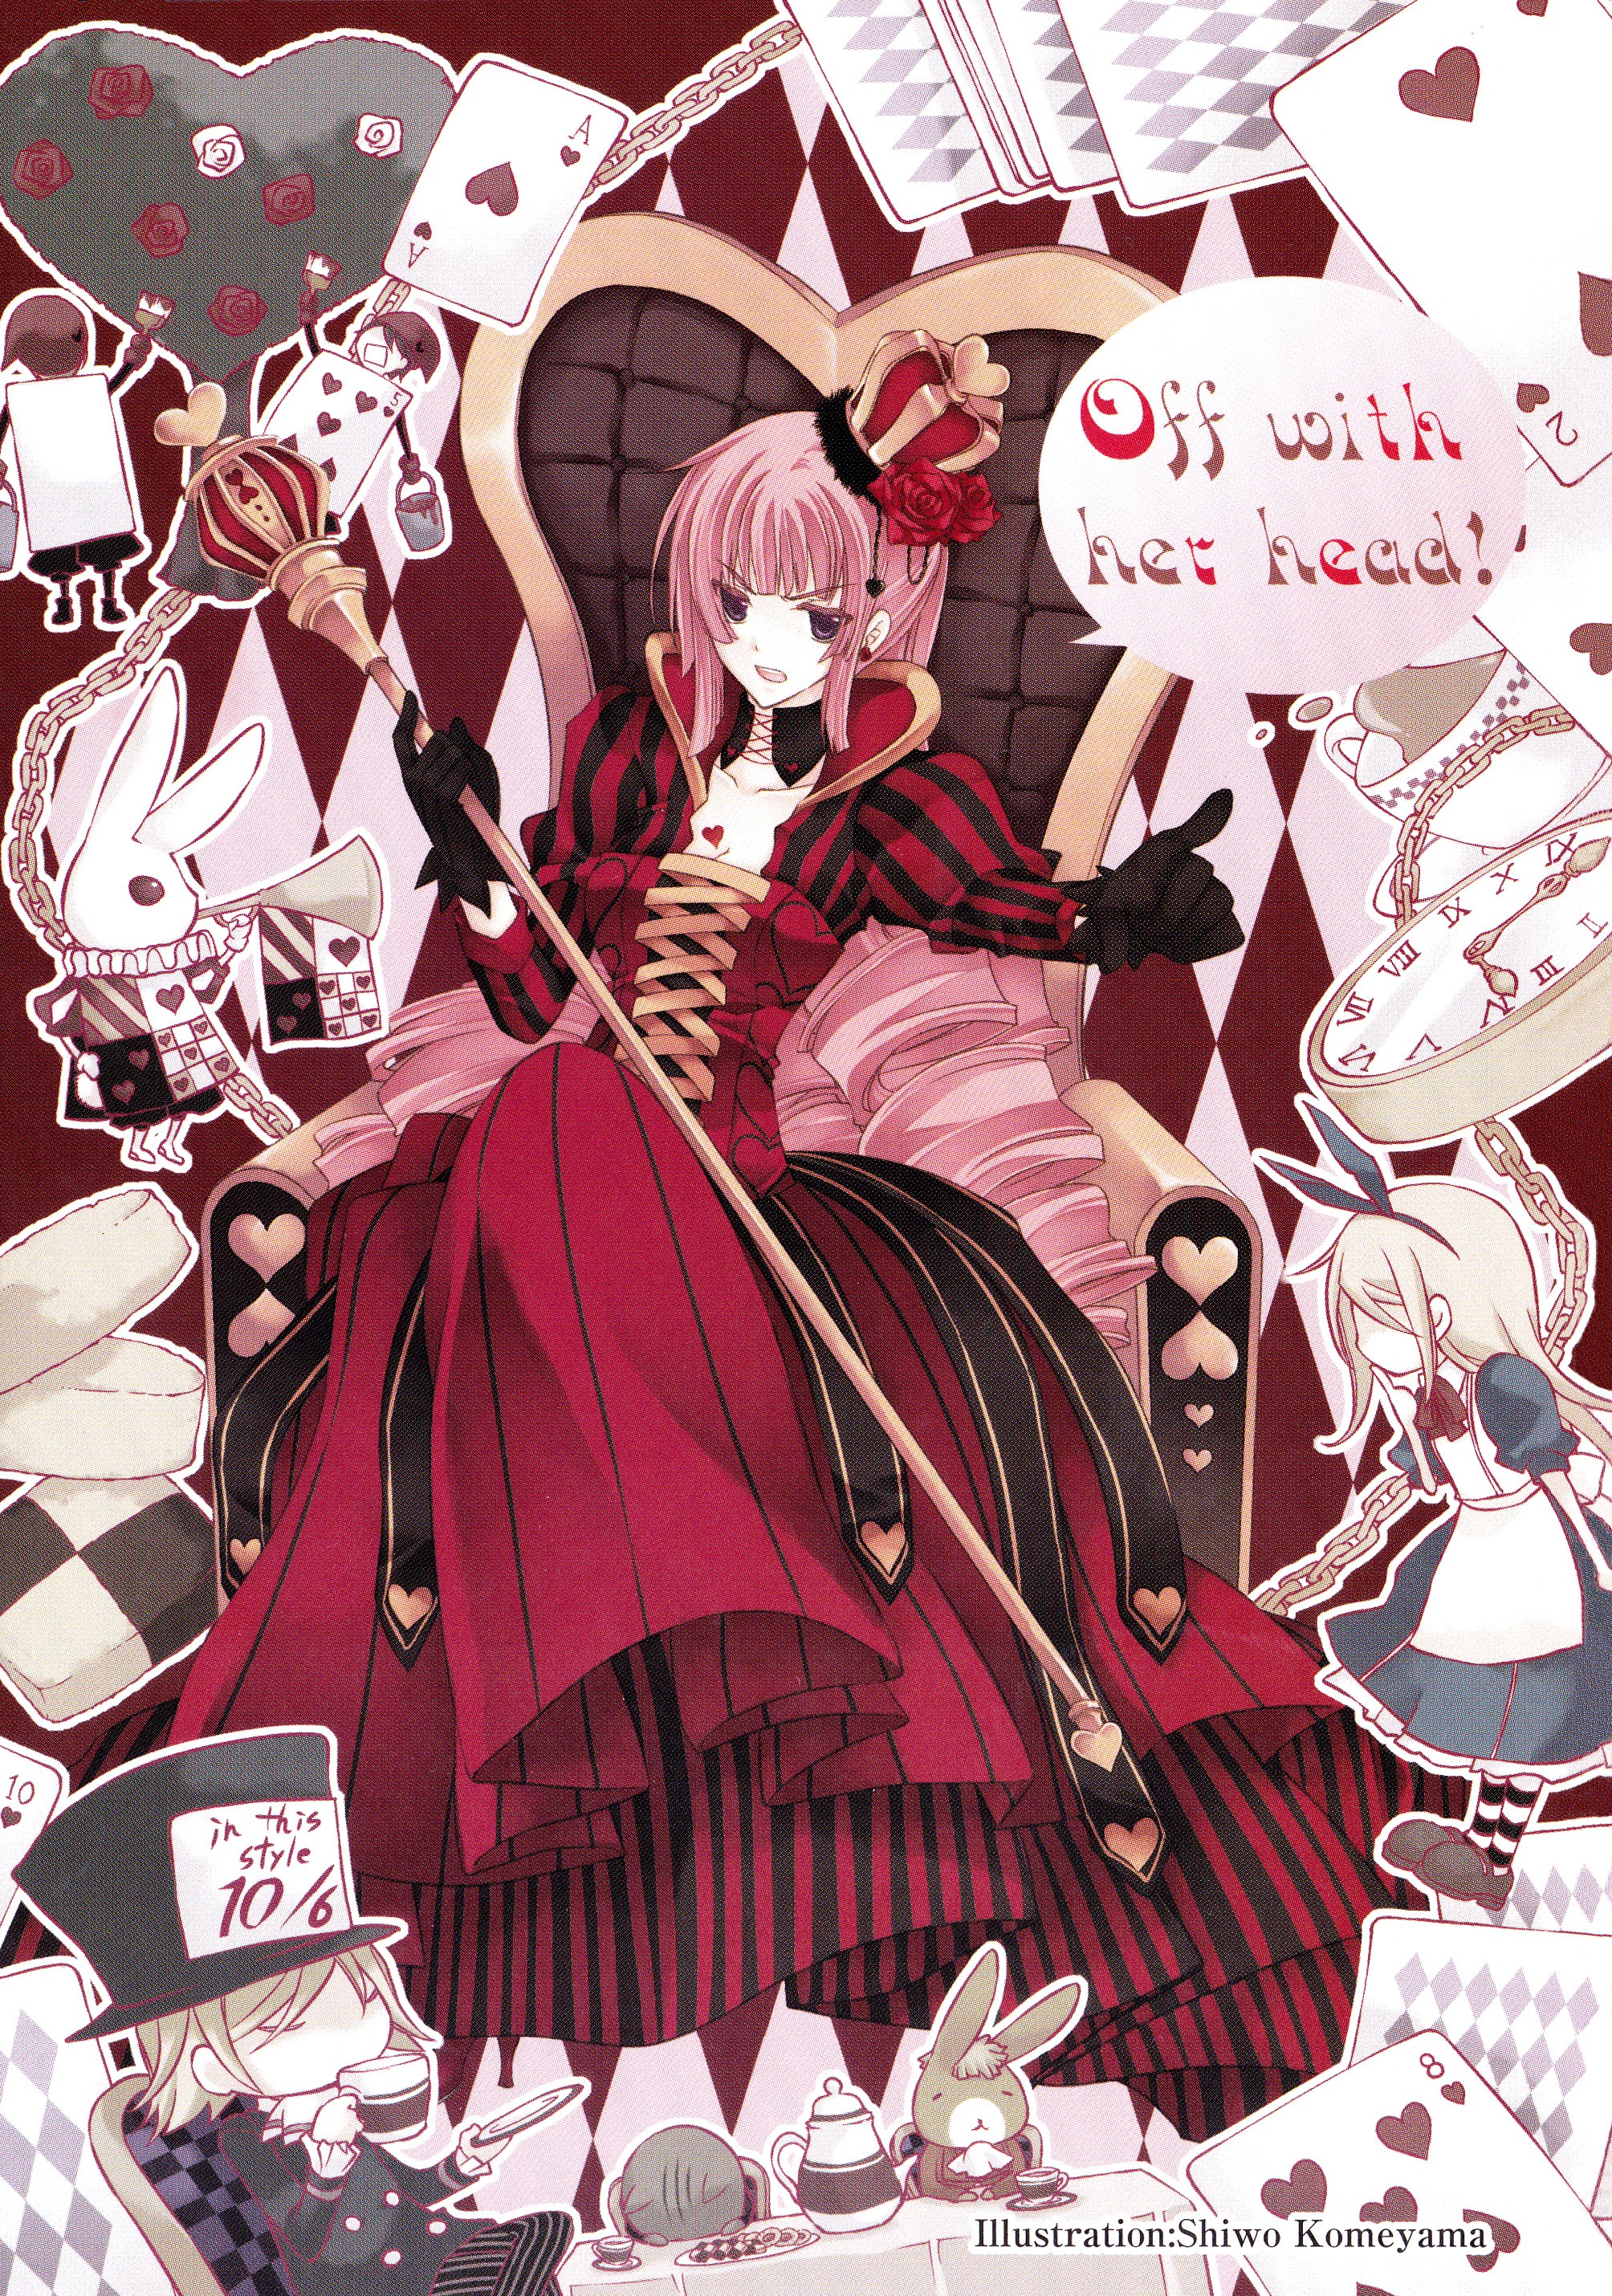 Anime 2008x2860 Alice in Wonderland Alice anime girls anime red dress fantasy art fantasy girl playing cards Red Queen